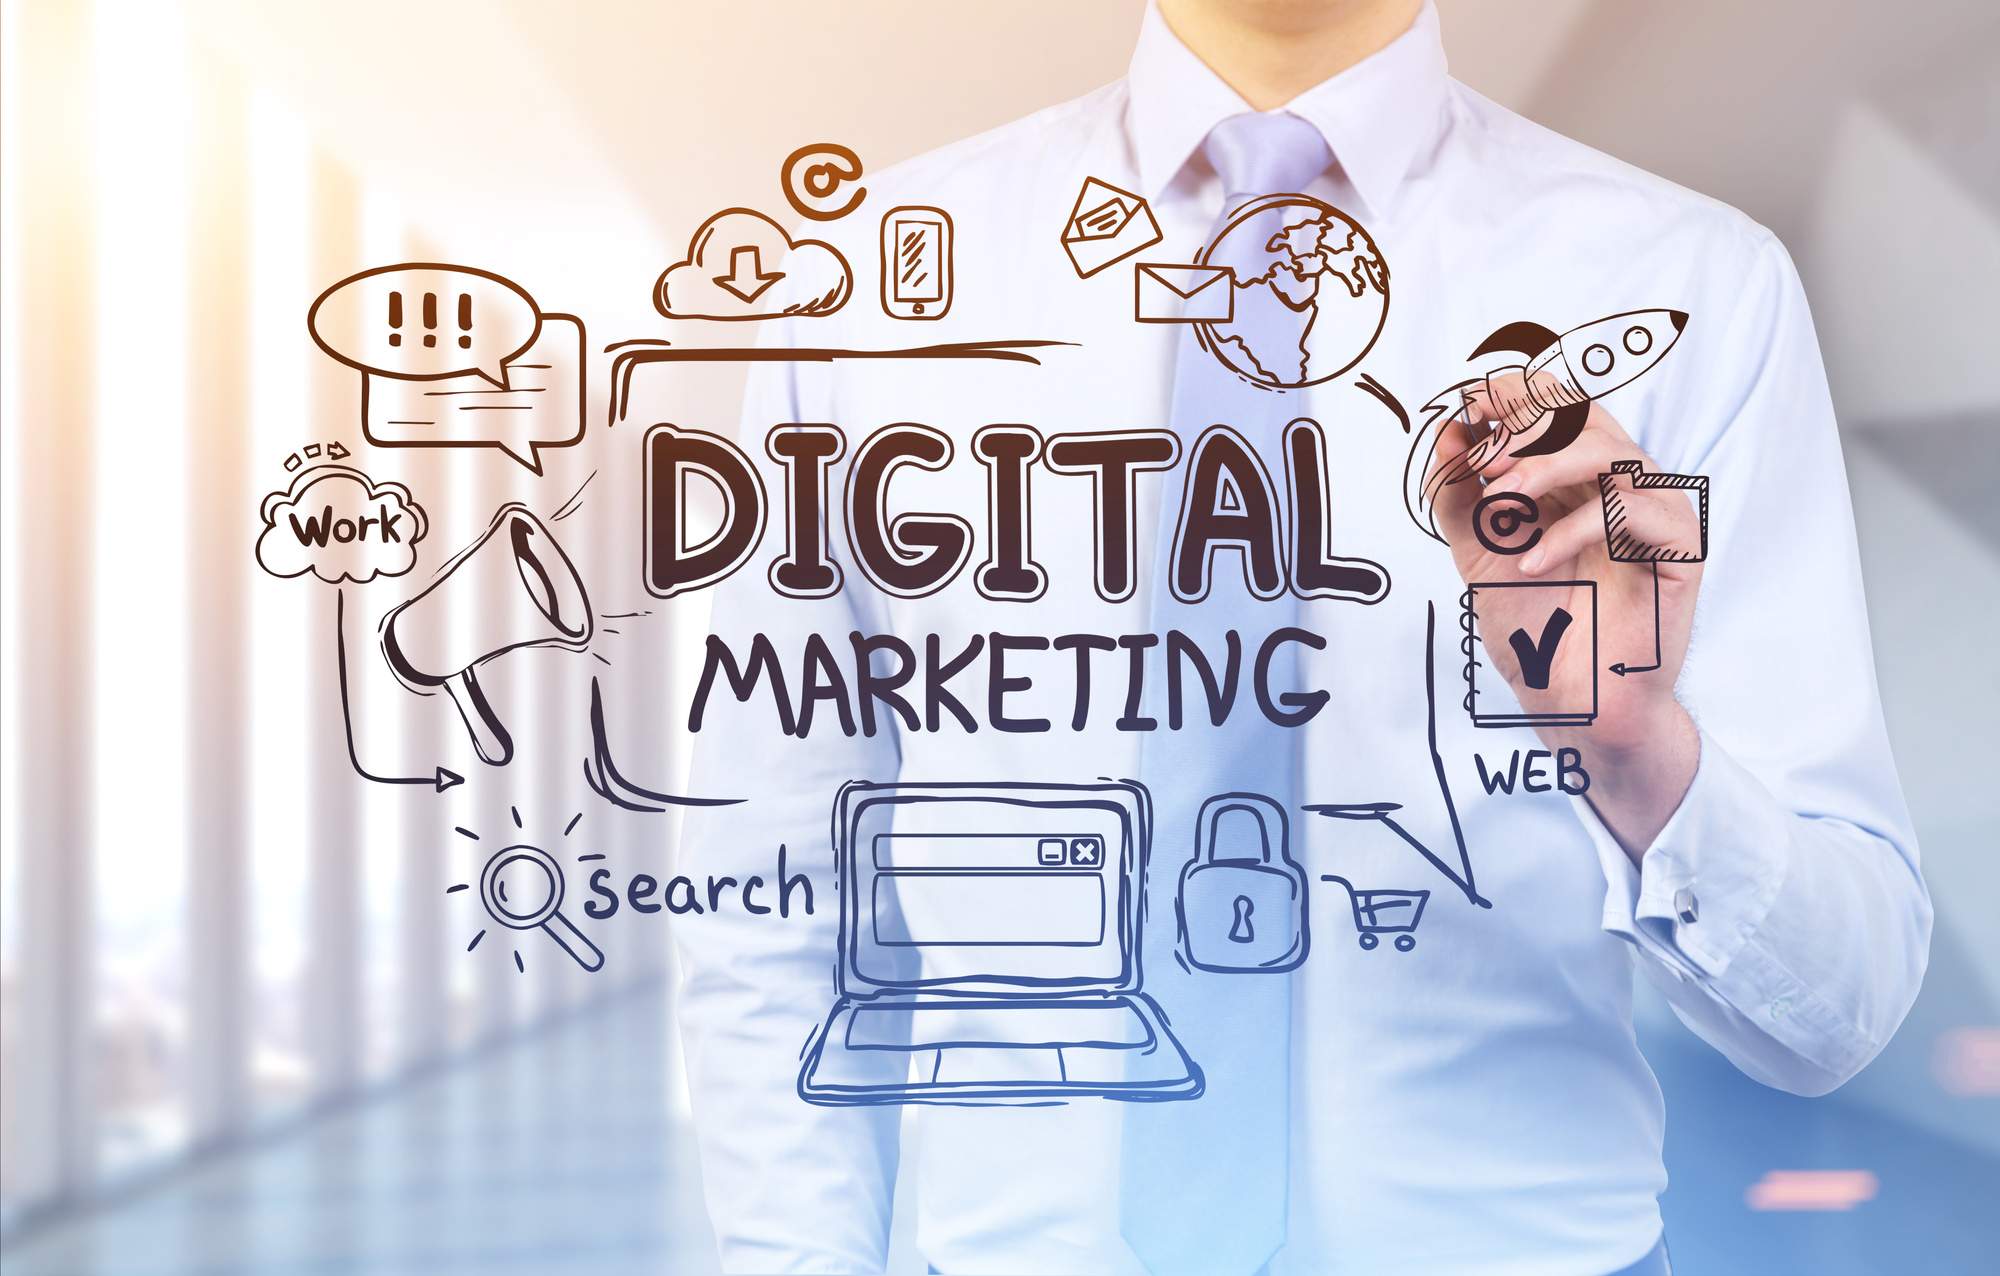 A Quick Guide on the Main Types of Digital Marketing